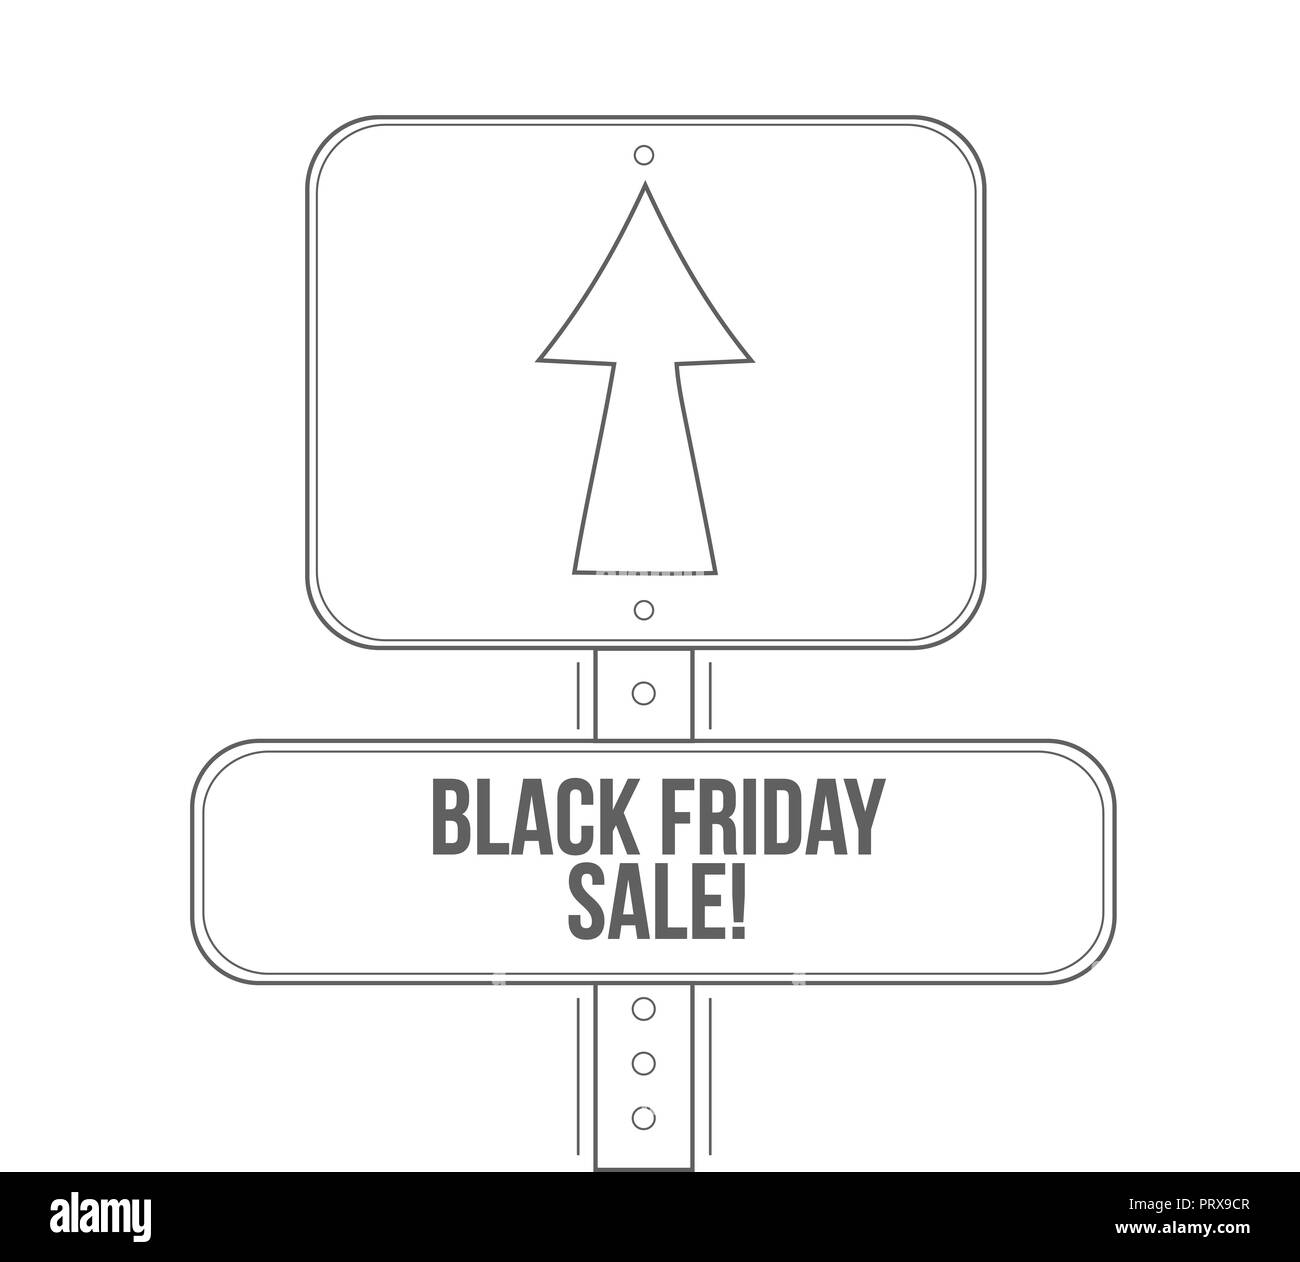 Black Friday sale line street sign isolated over a white background Stock Photo